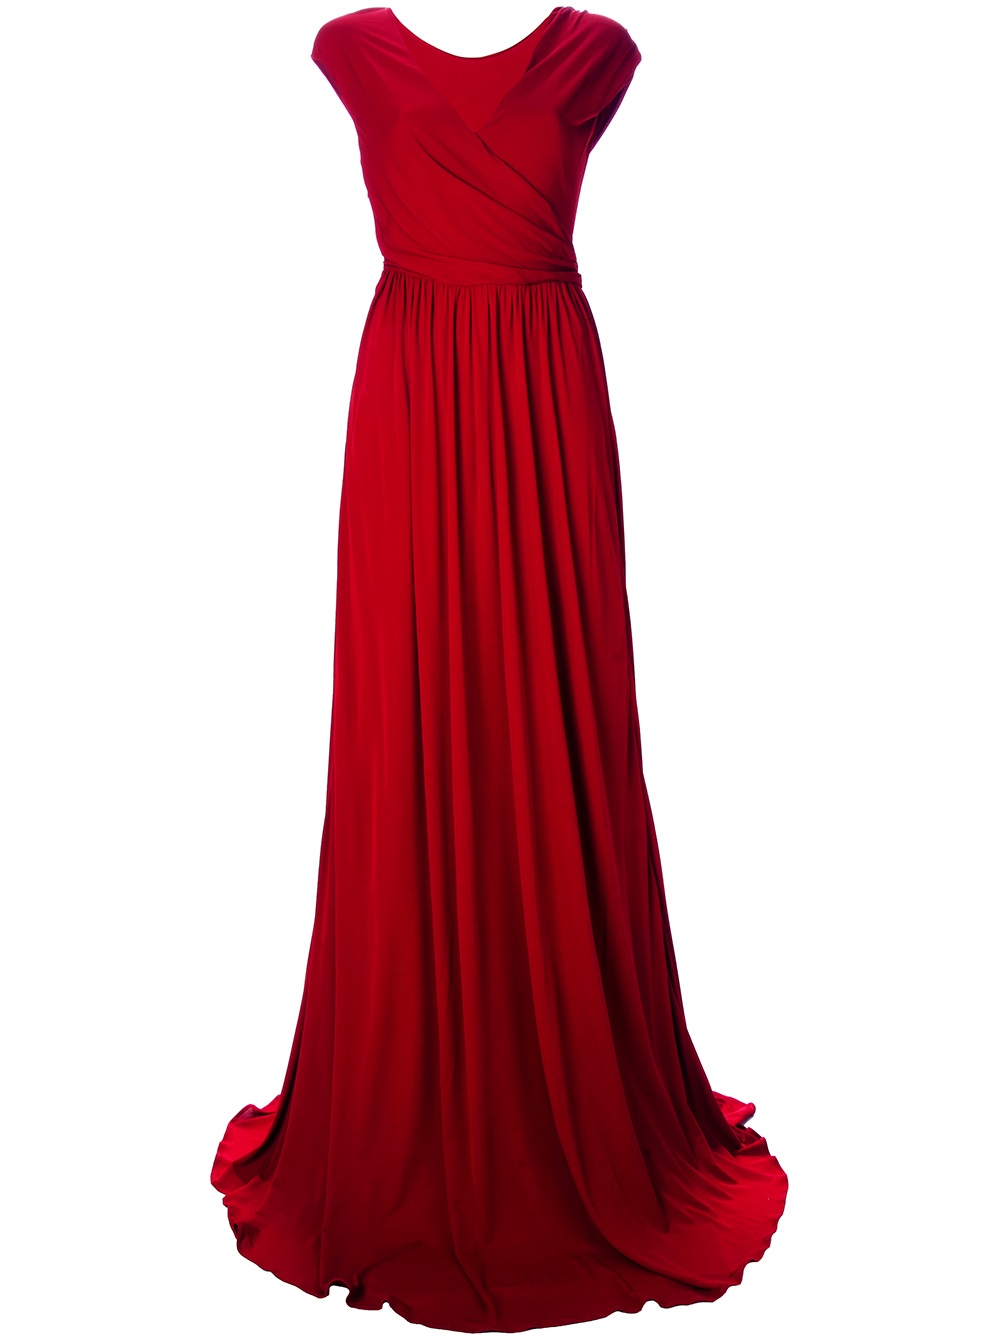 Lyst - Issa Gathered Crepe Gown in Red